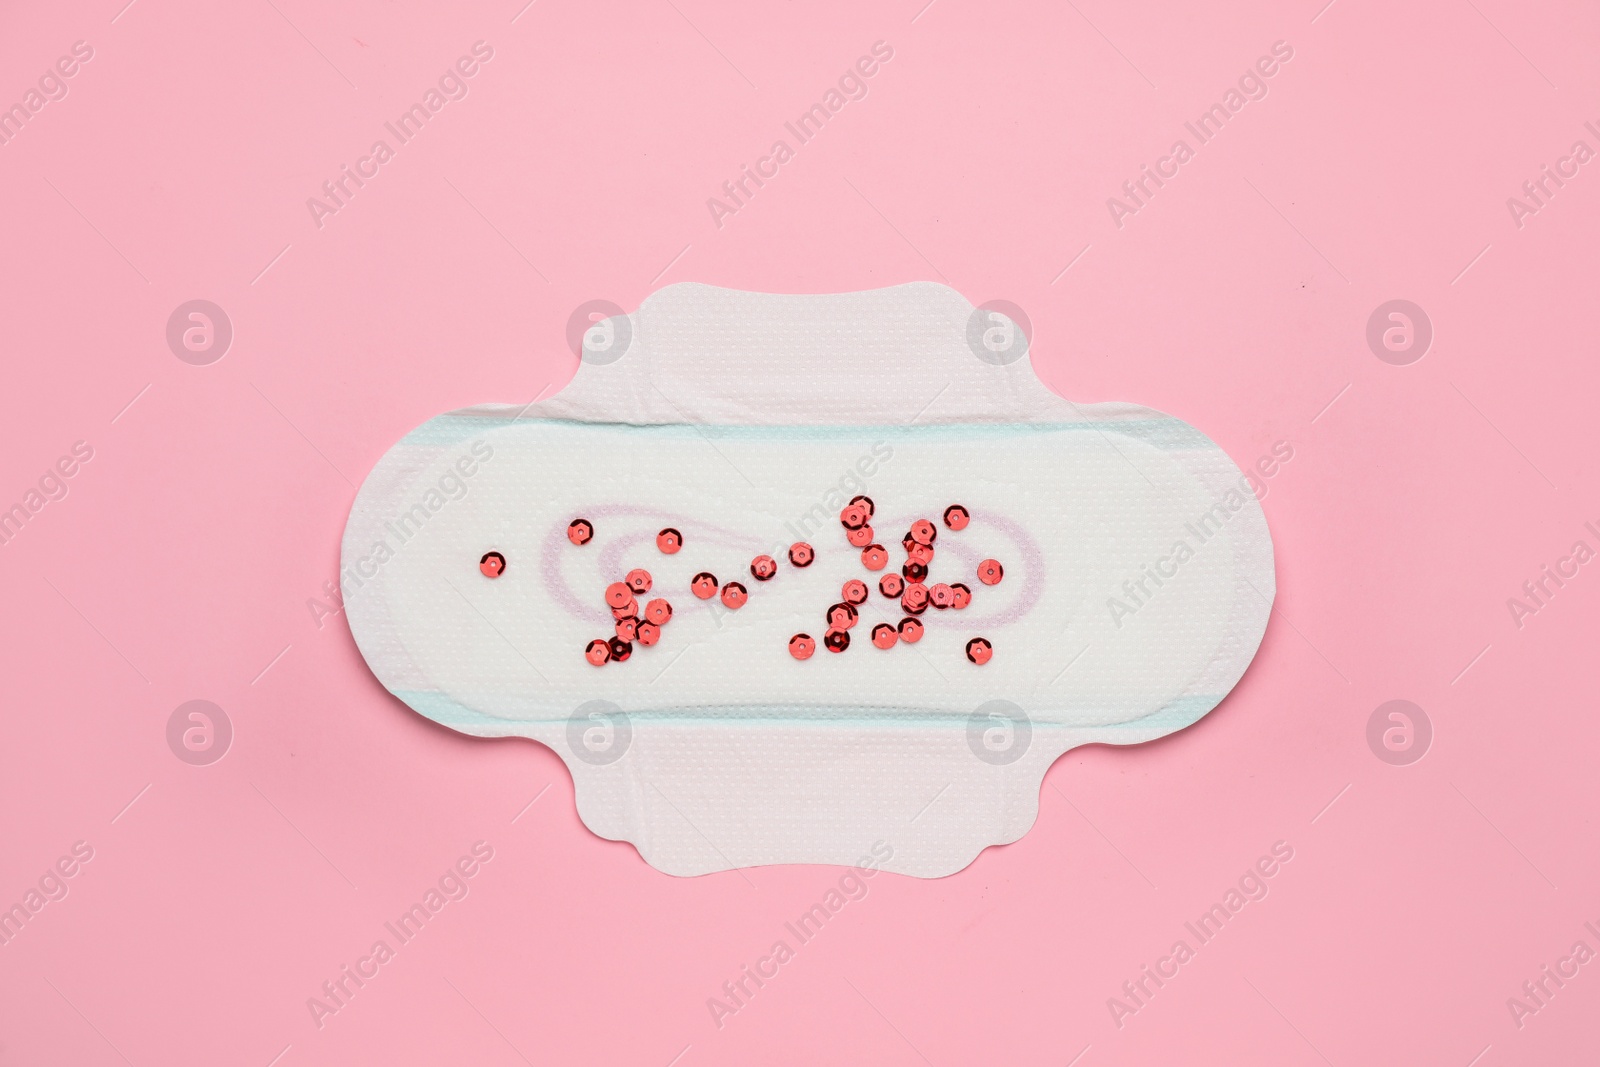 Photo of Menstrual pad with red sequins on pink background, top view